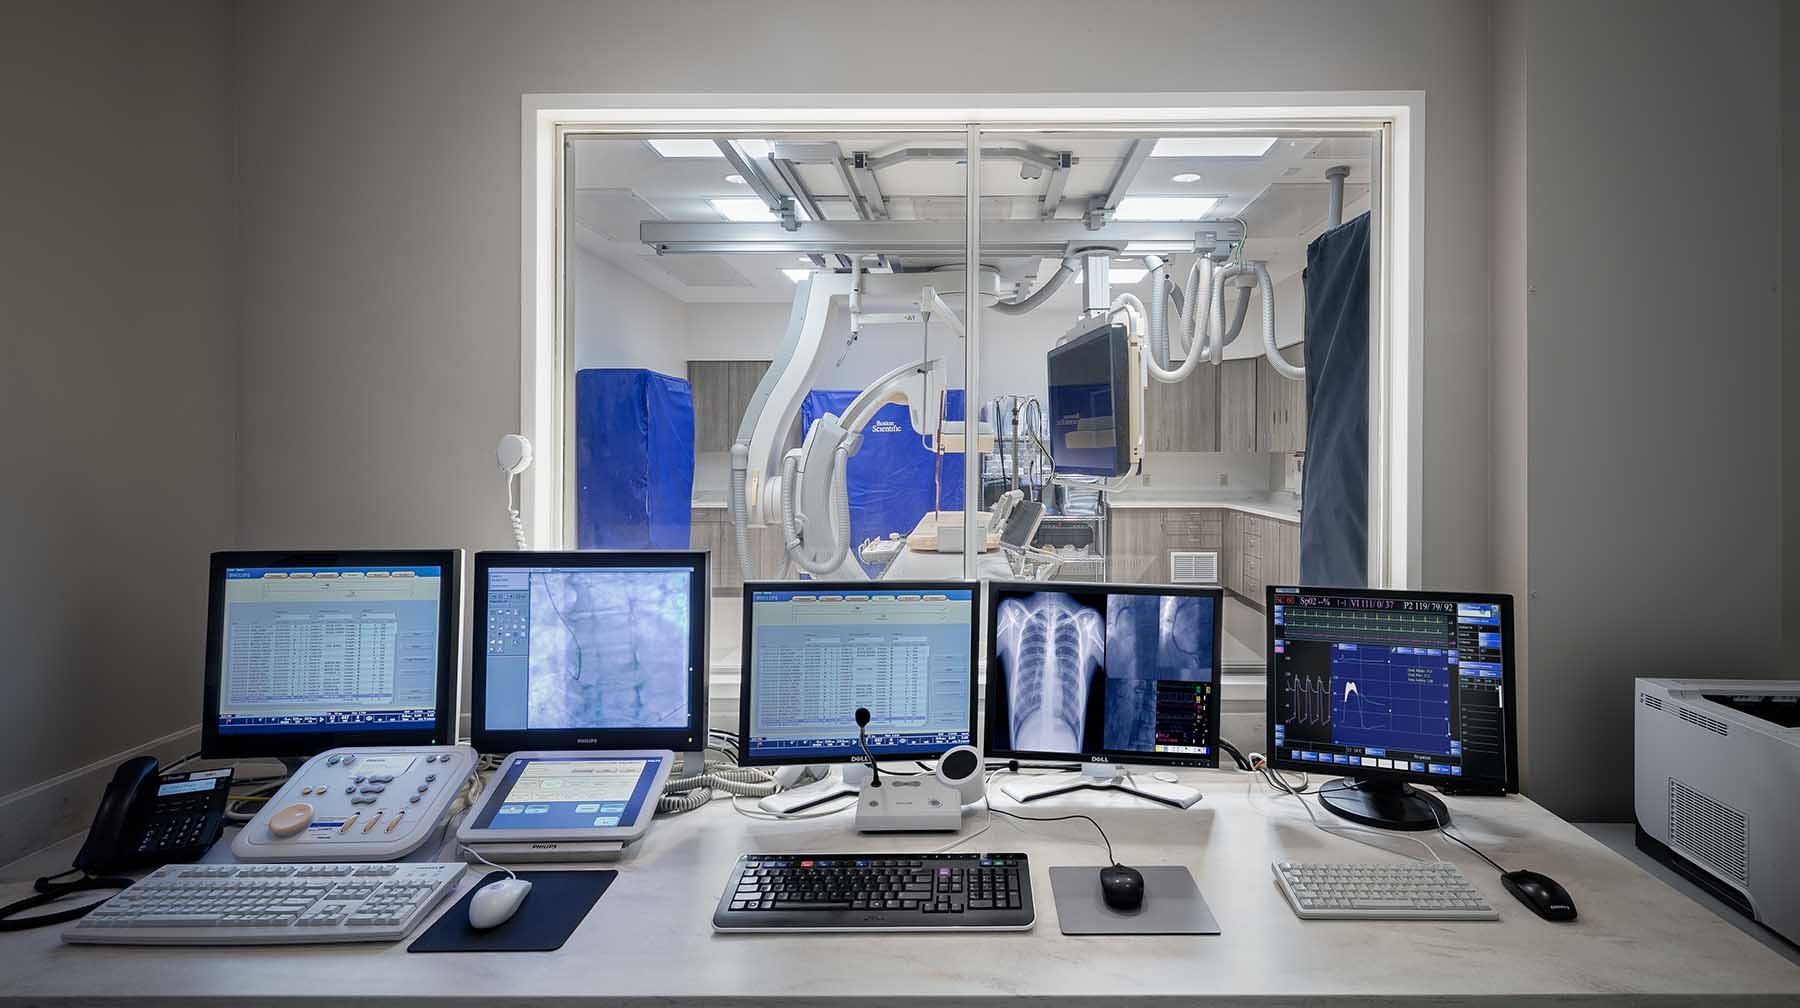 Florida Heart Associates engaged PRA to renovate the existing Cardiac Catheterization Lab and support spaces to improve the suite’s overall efficiency and state-of-the-art performance.